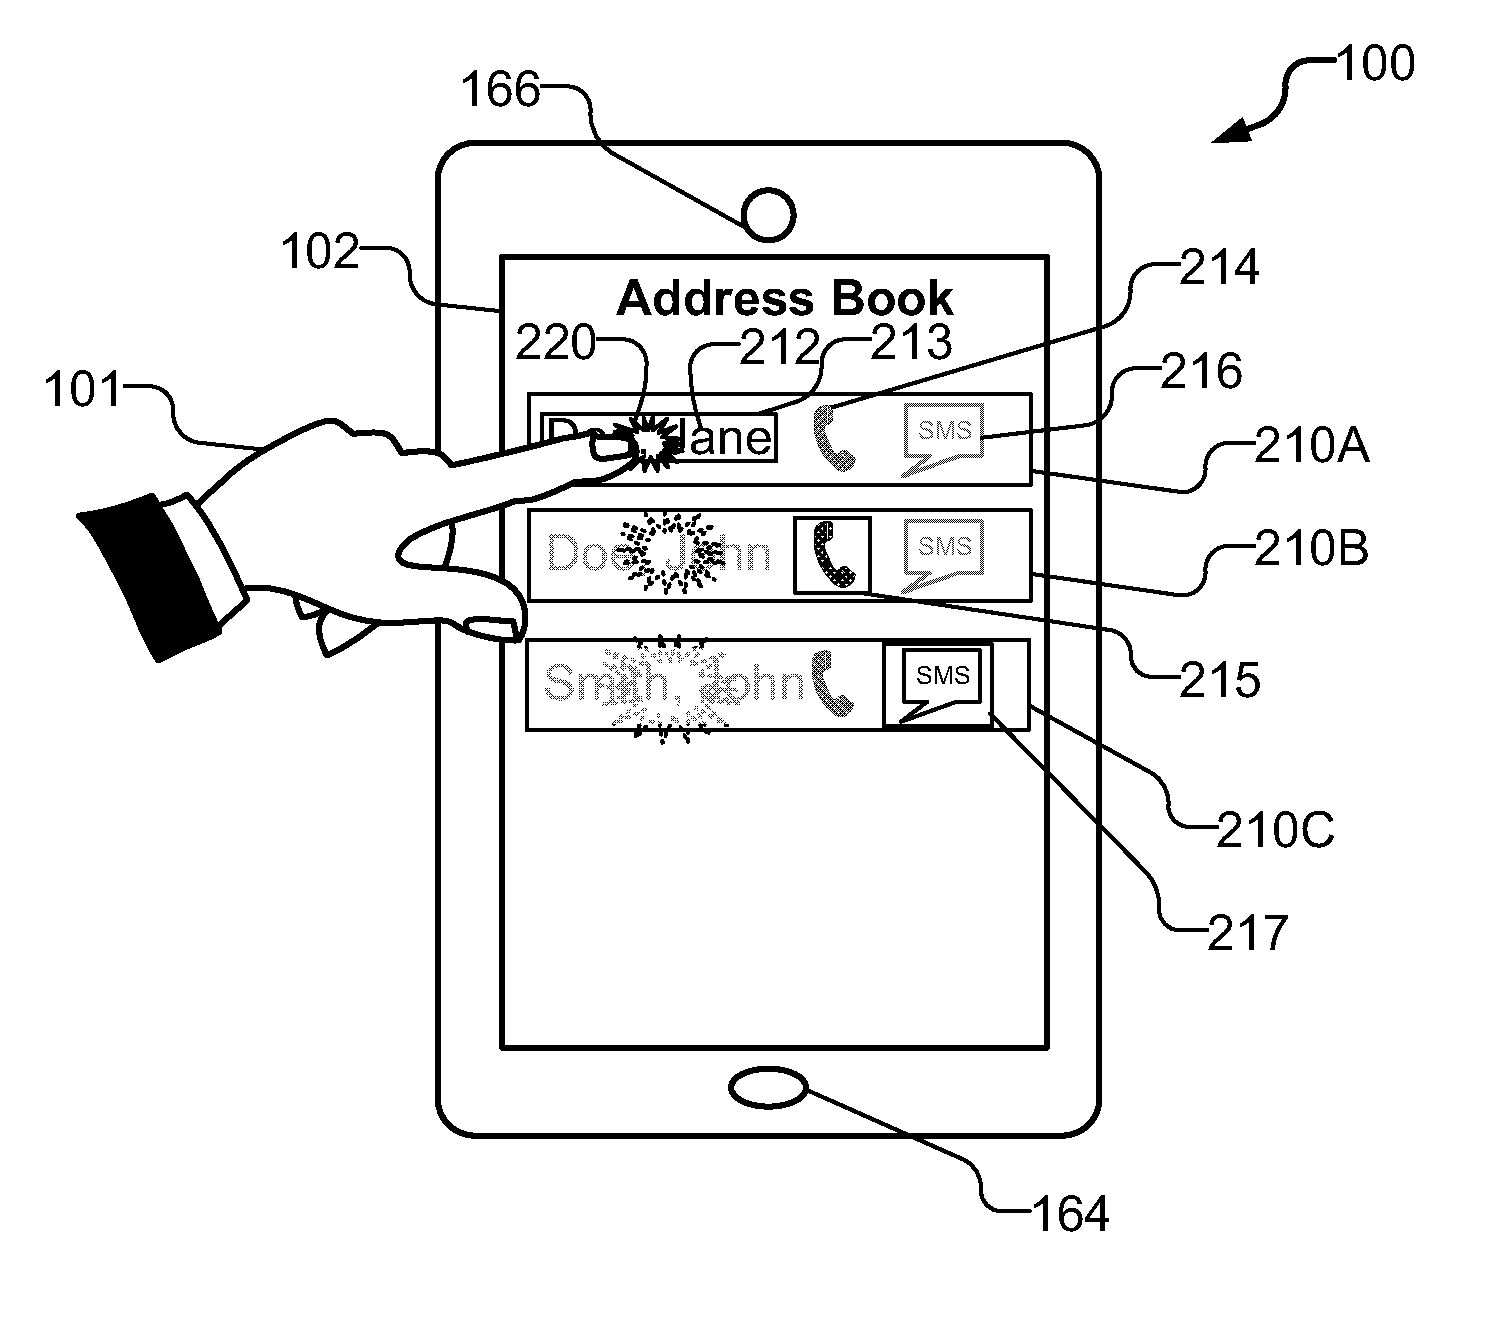 User interface elements augmented with force detection